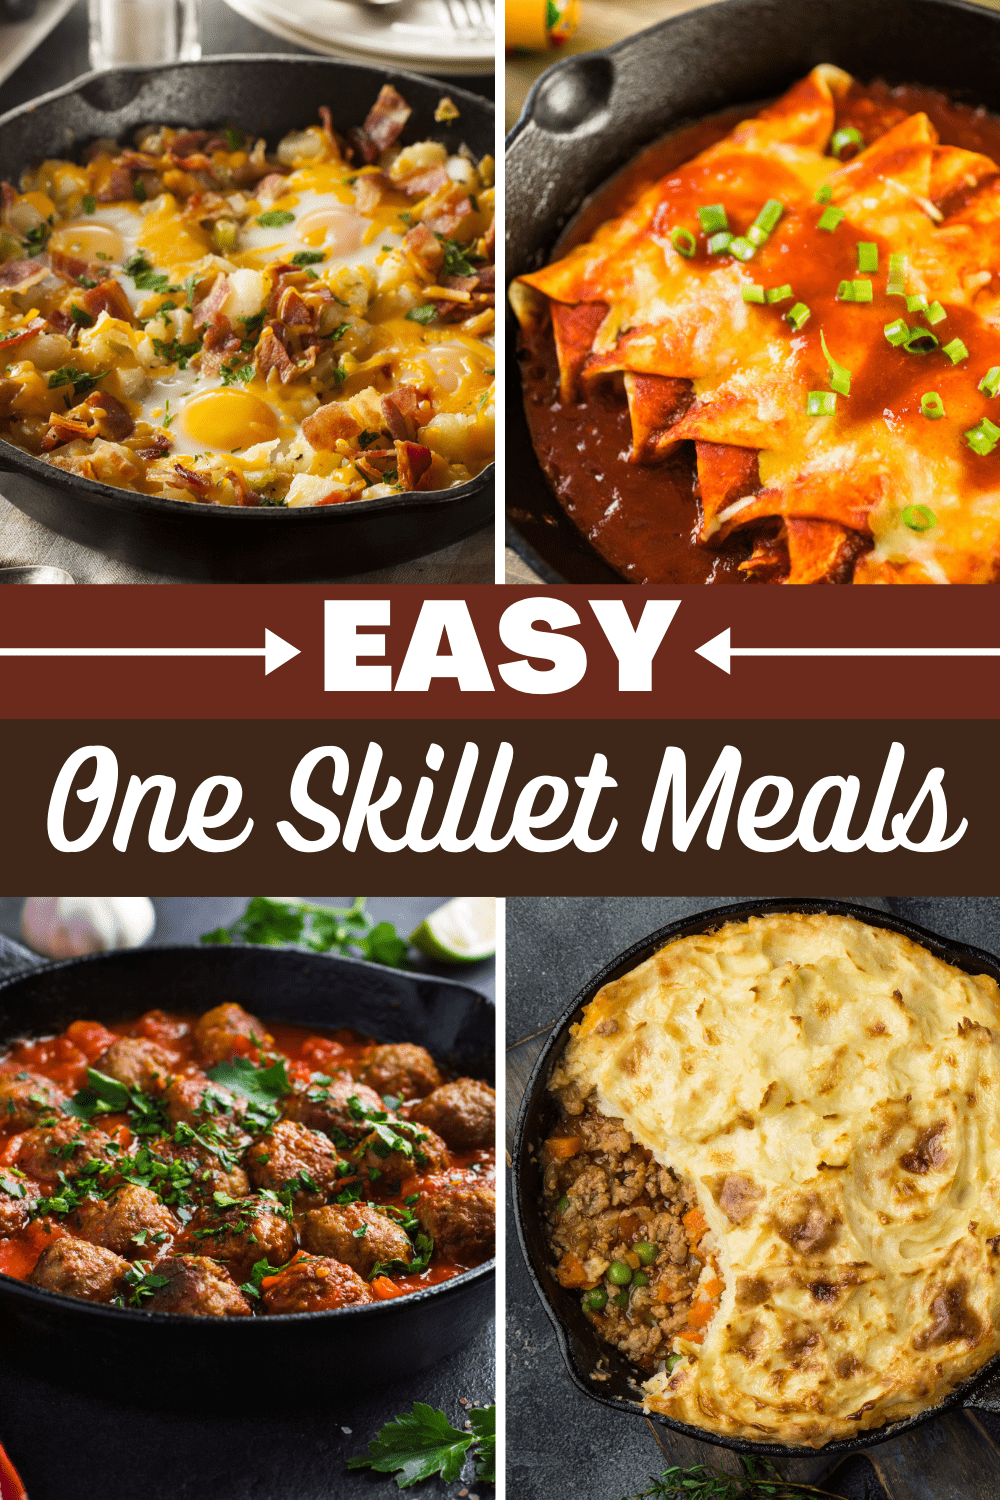 24 Easy One-Skillet Meals - Insanely Good